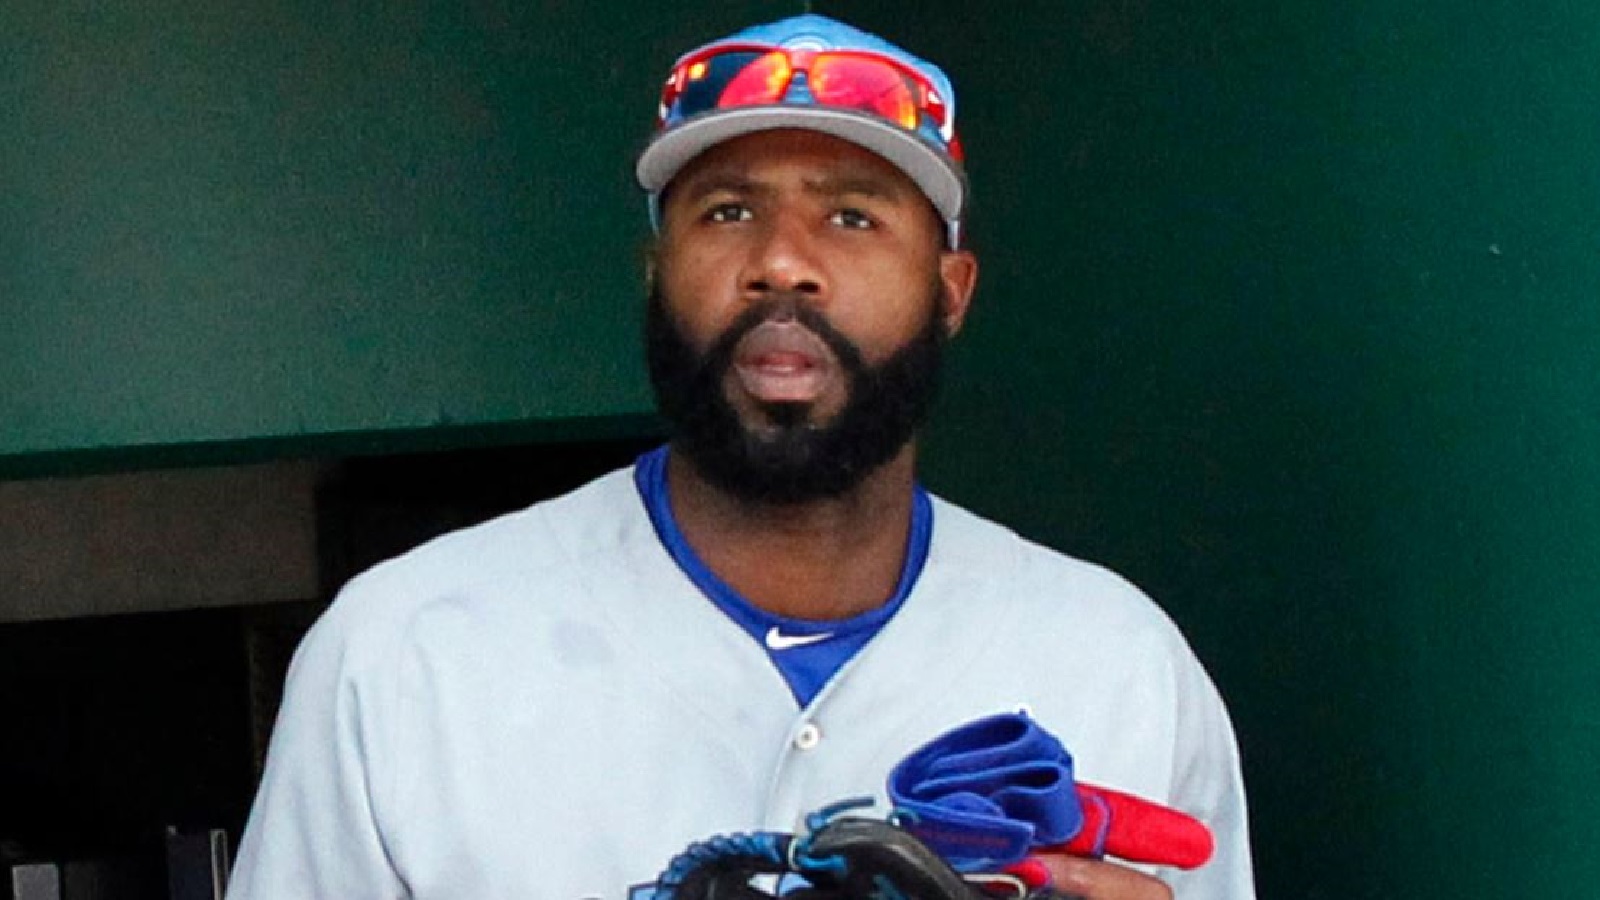 Dodgers sign OF Jason Heyward to a minor league contract - ESPN